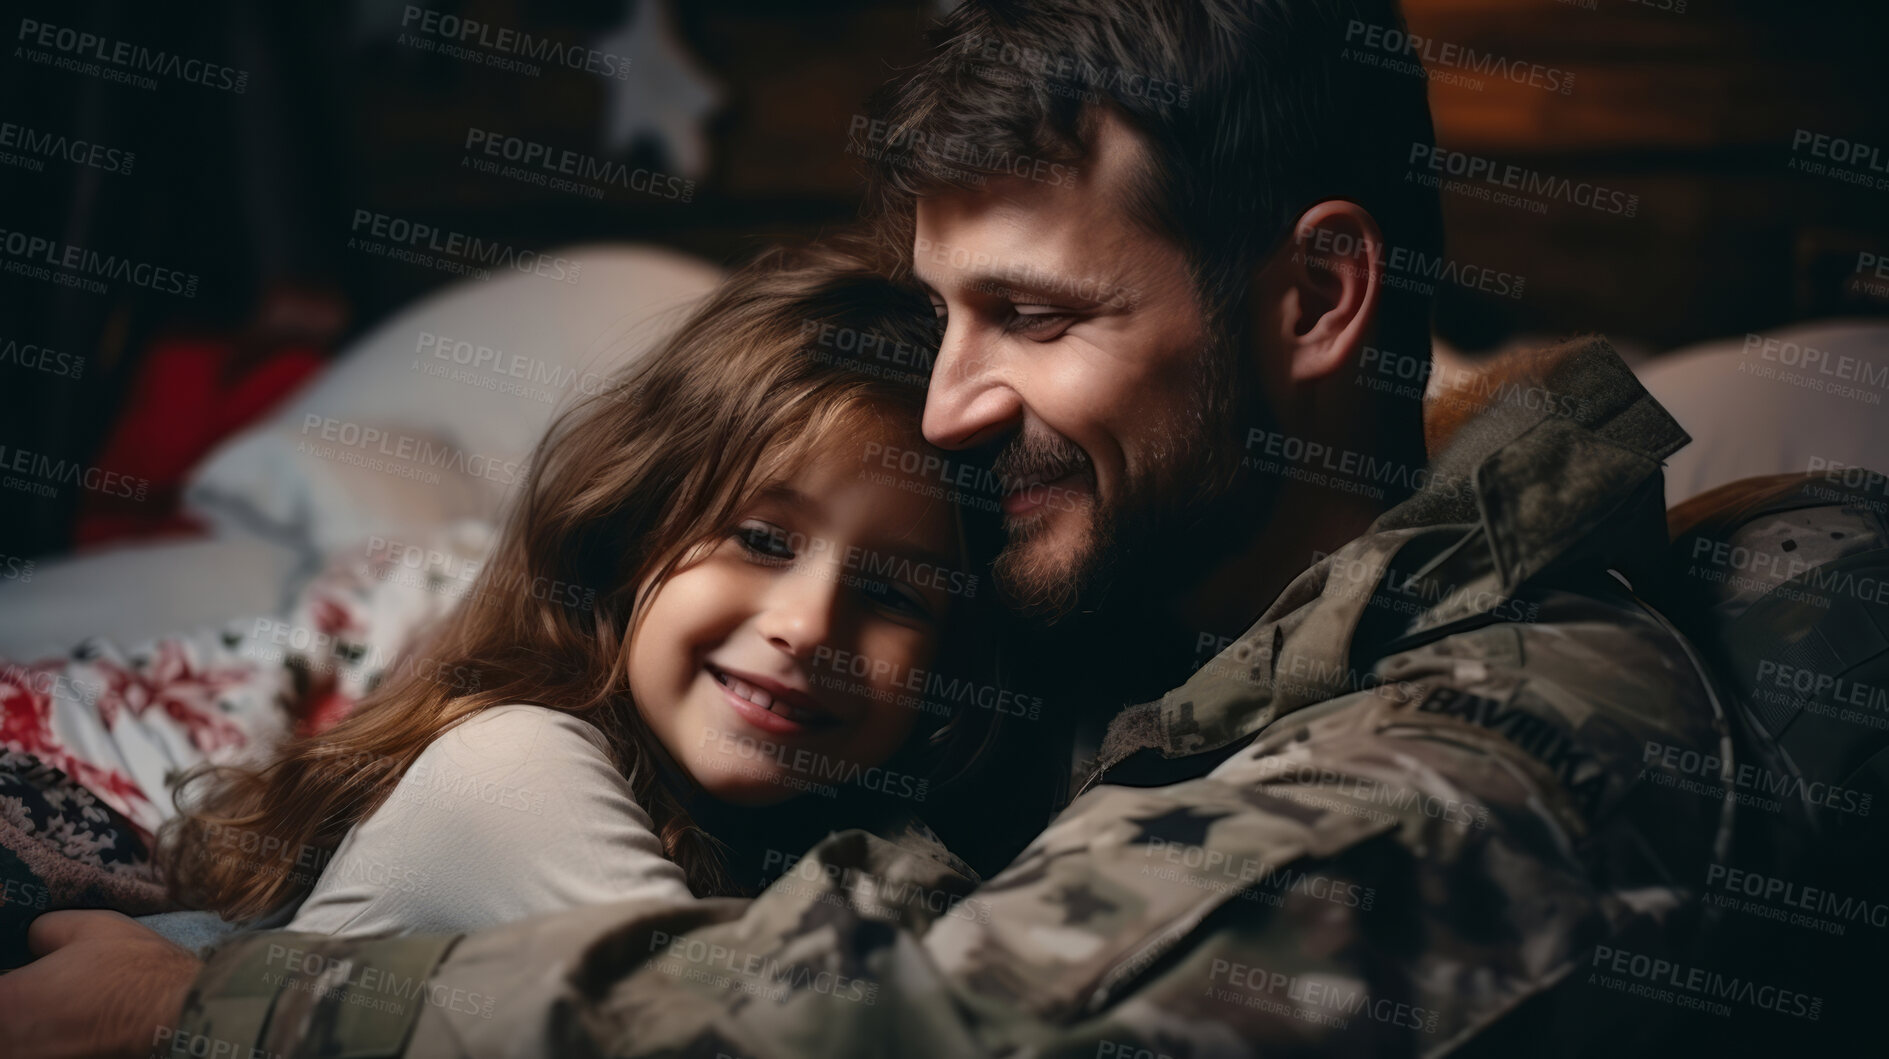 Buy stock photo Close-up portrait of soldier hugging child on couch. Veteran homecoming concept.